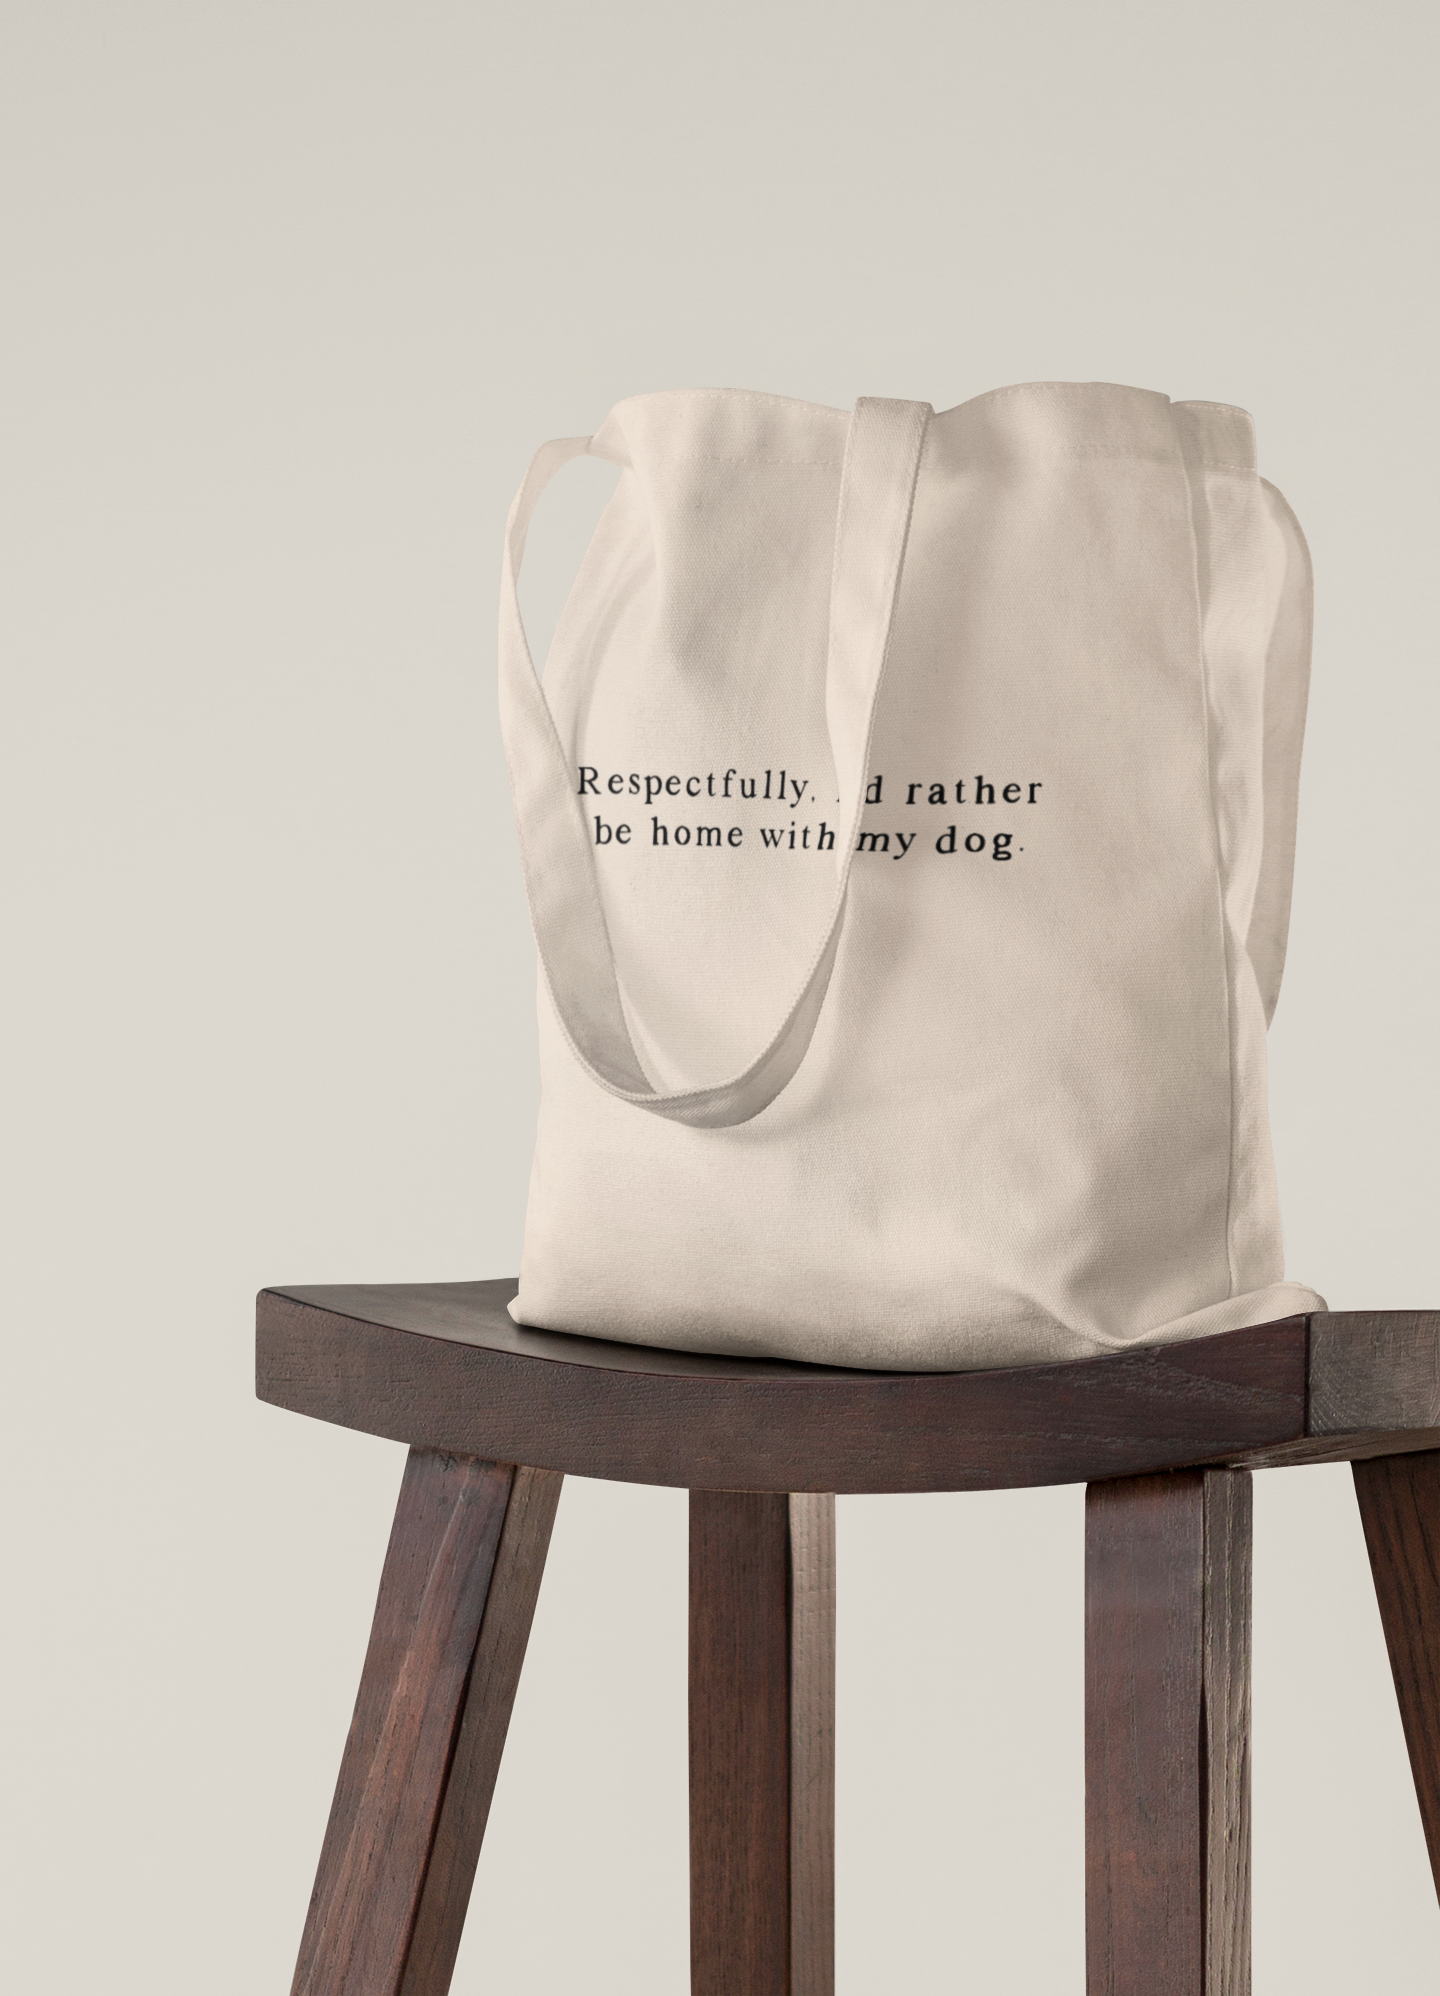 Respectfully, I'd Rather Be Home With My Dog | Cotton Tote Bag